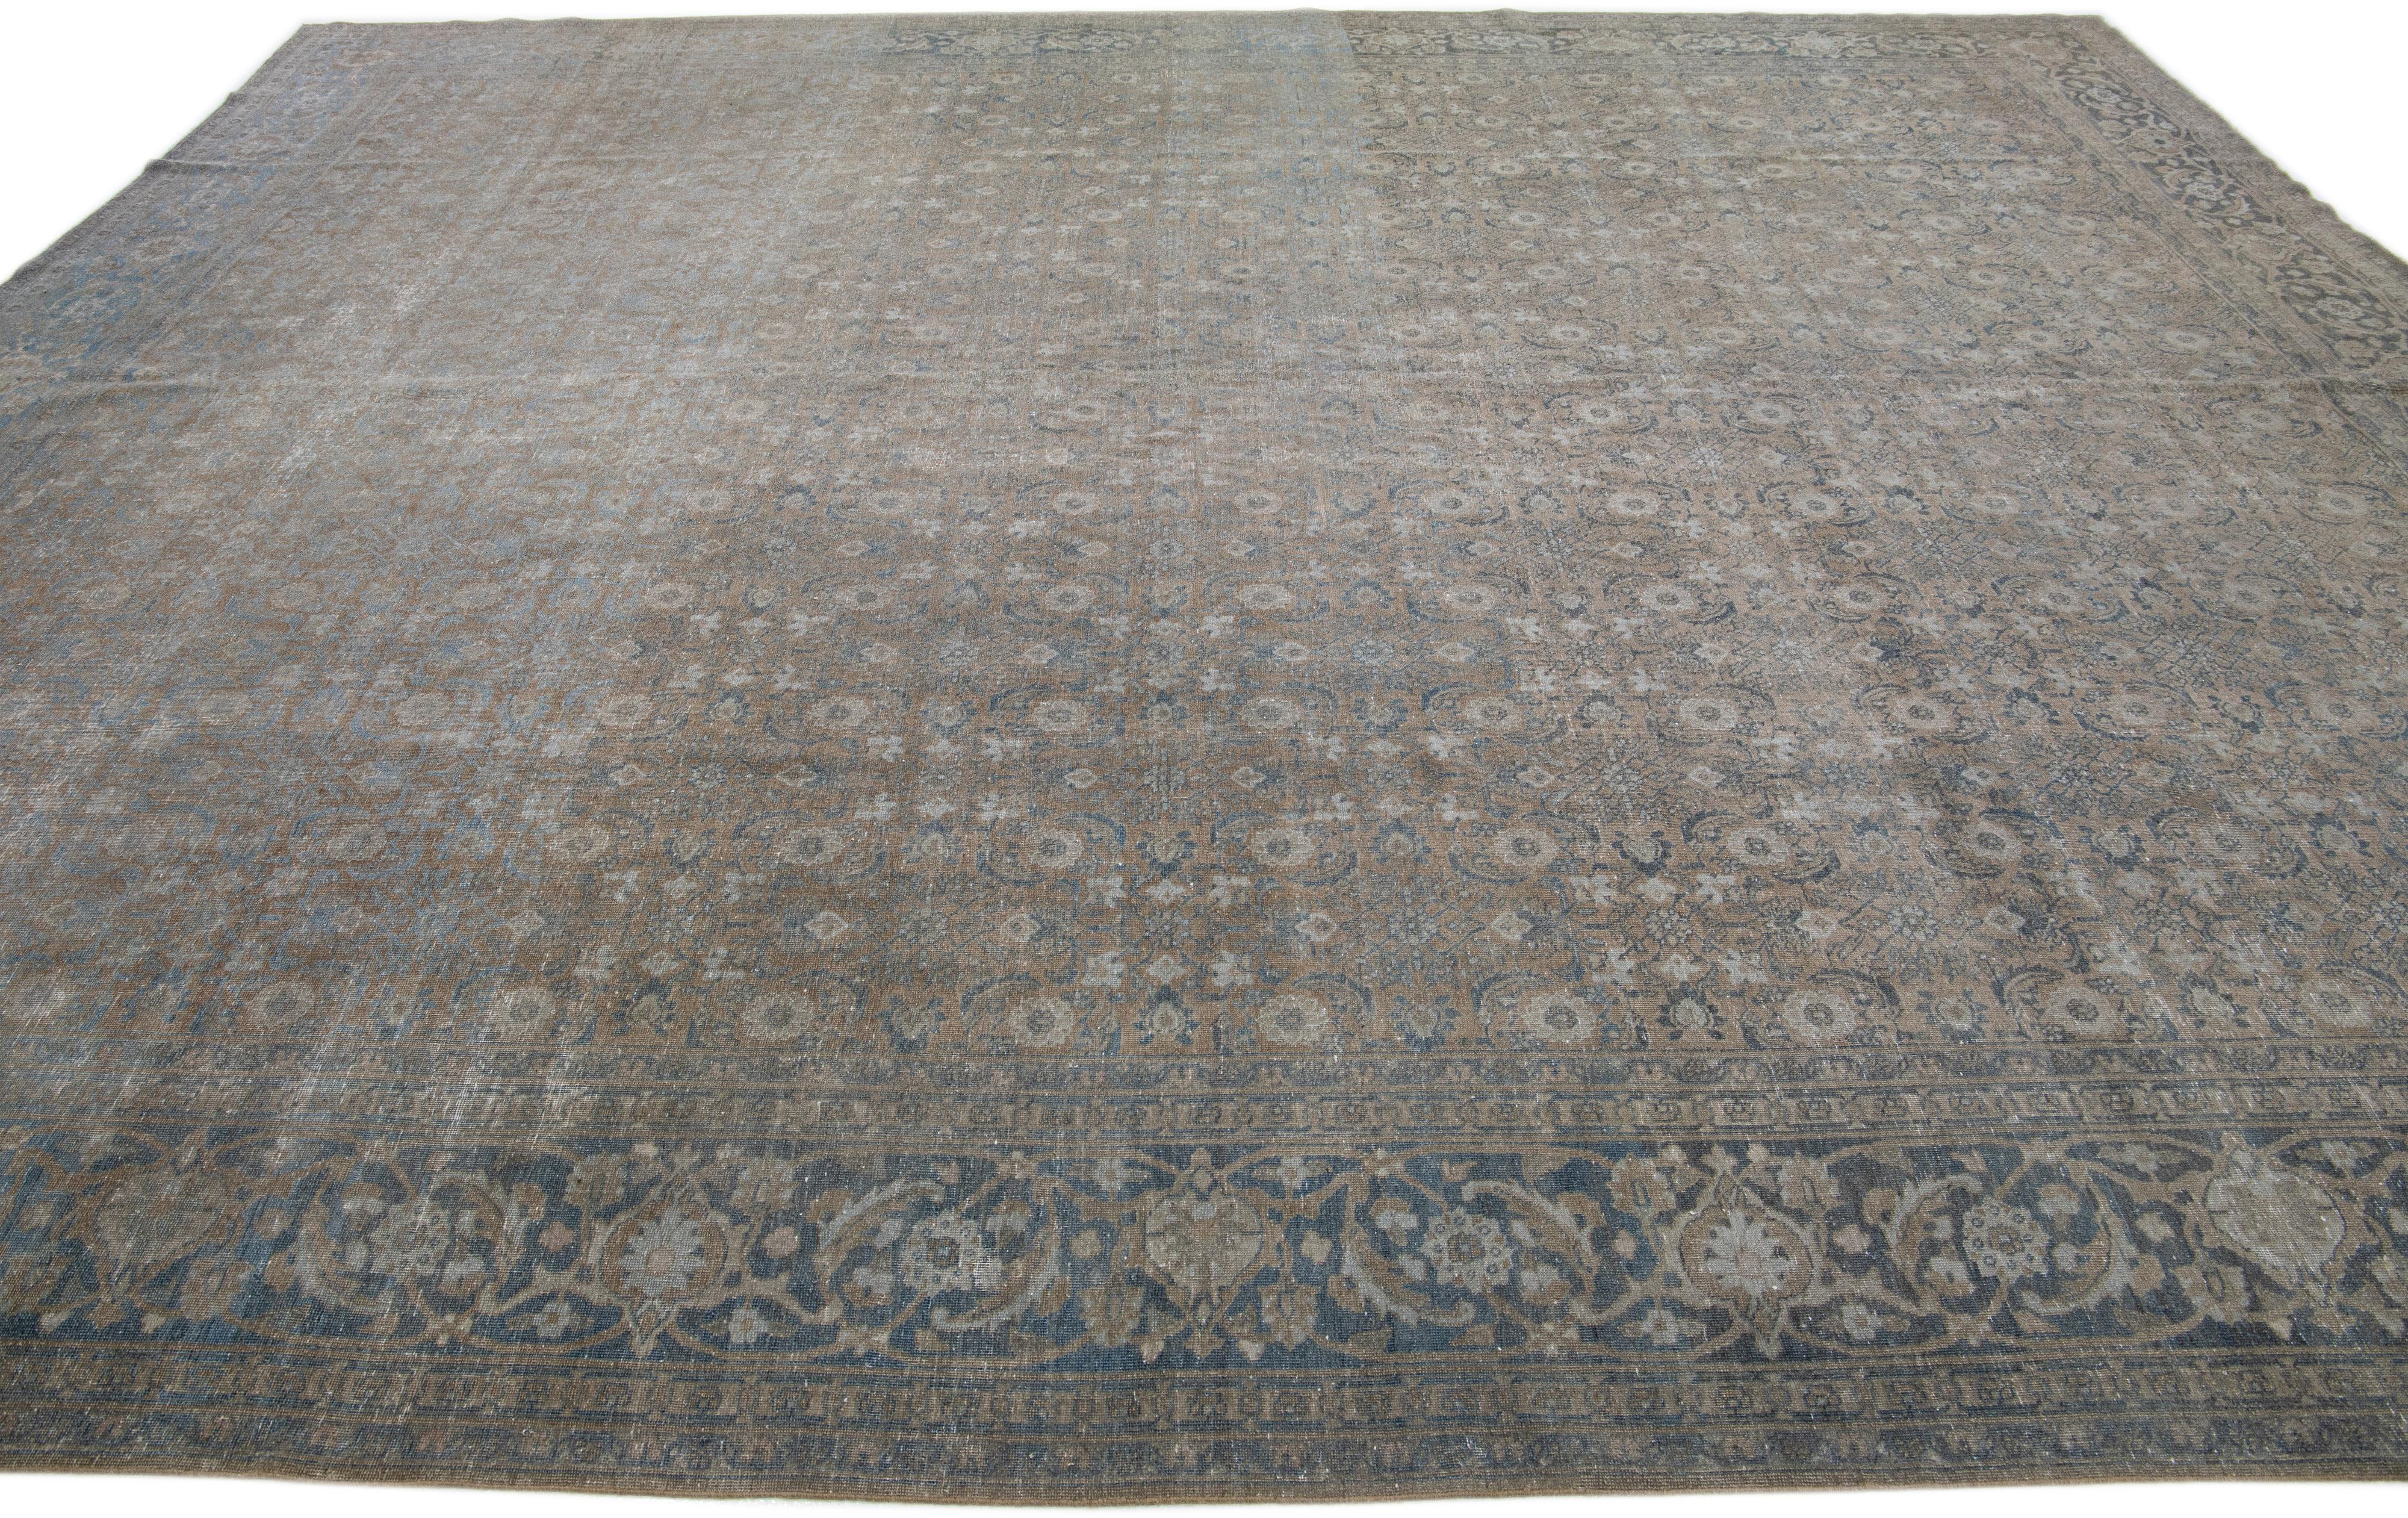 Handmade Antique Tabriz Brown Persian Wool Rug with Floral Motif In Good Condition For Sale In Norwalk, CT